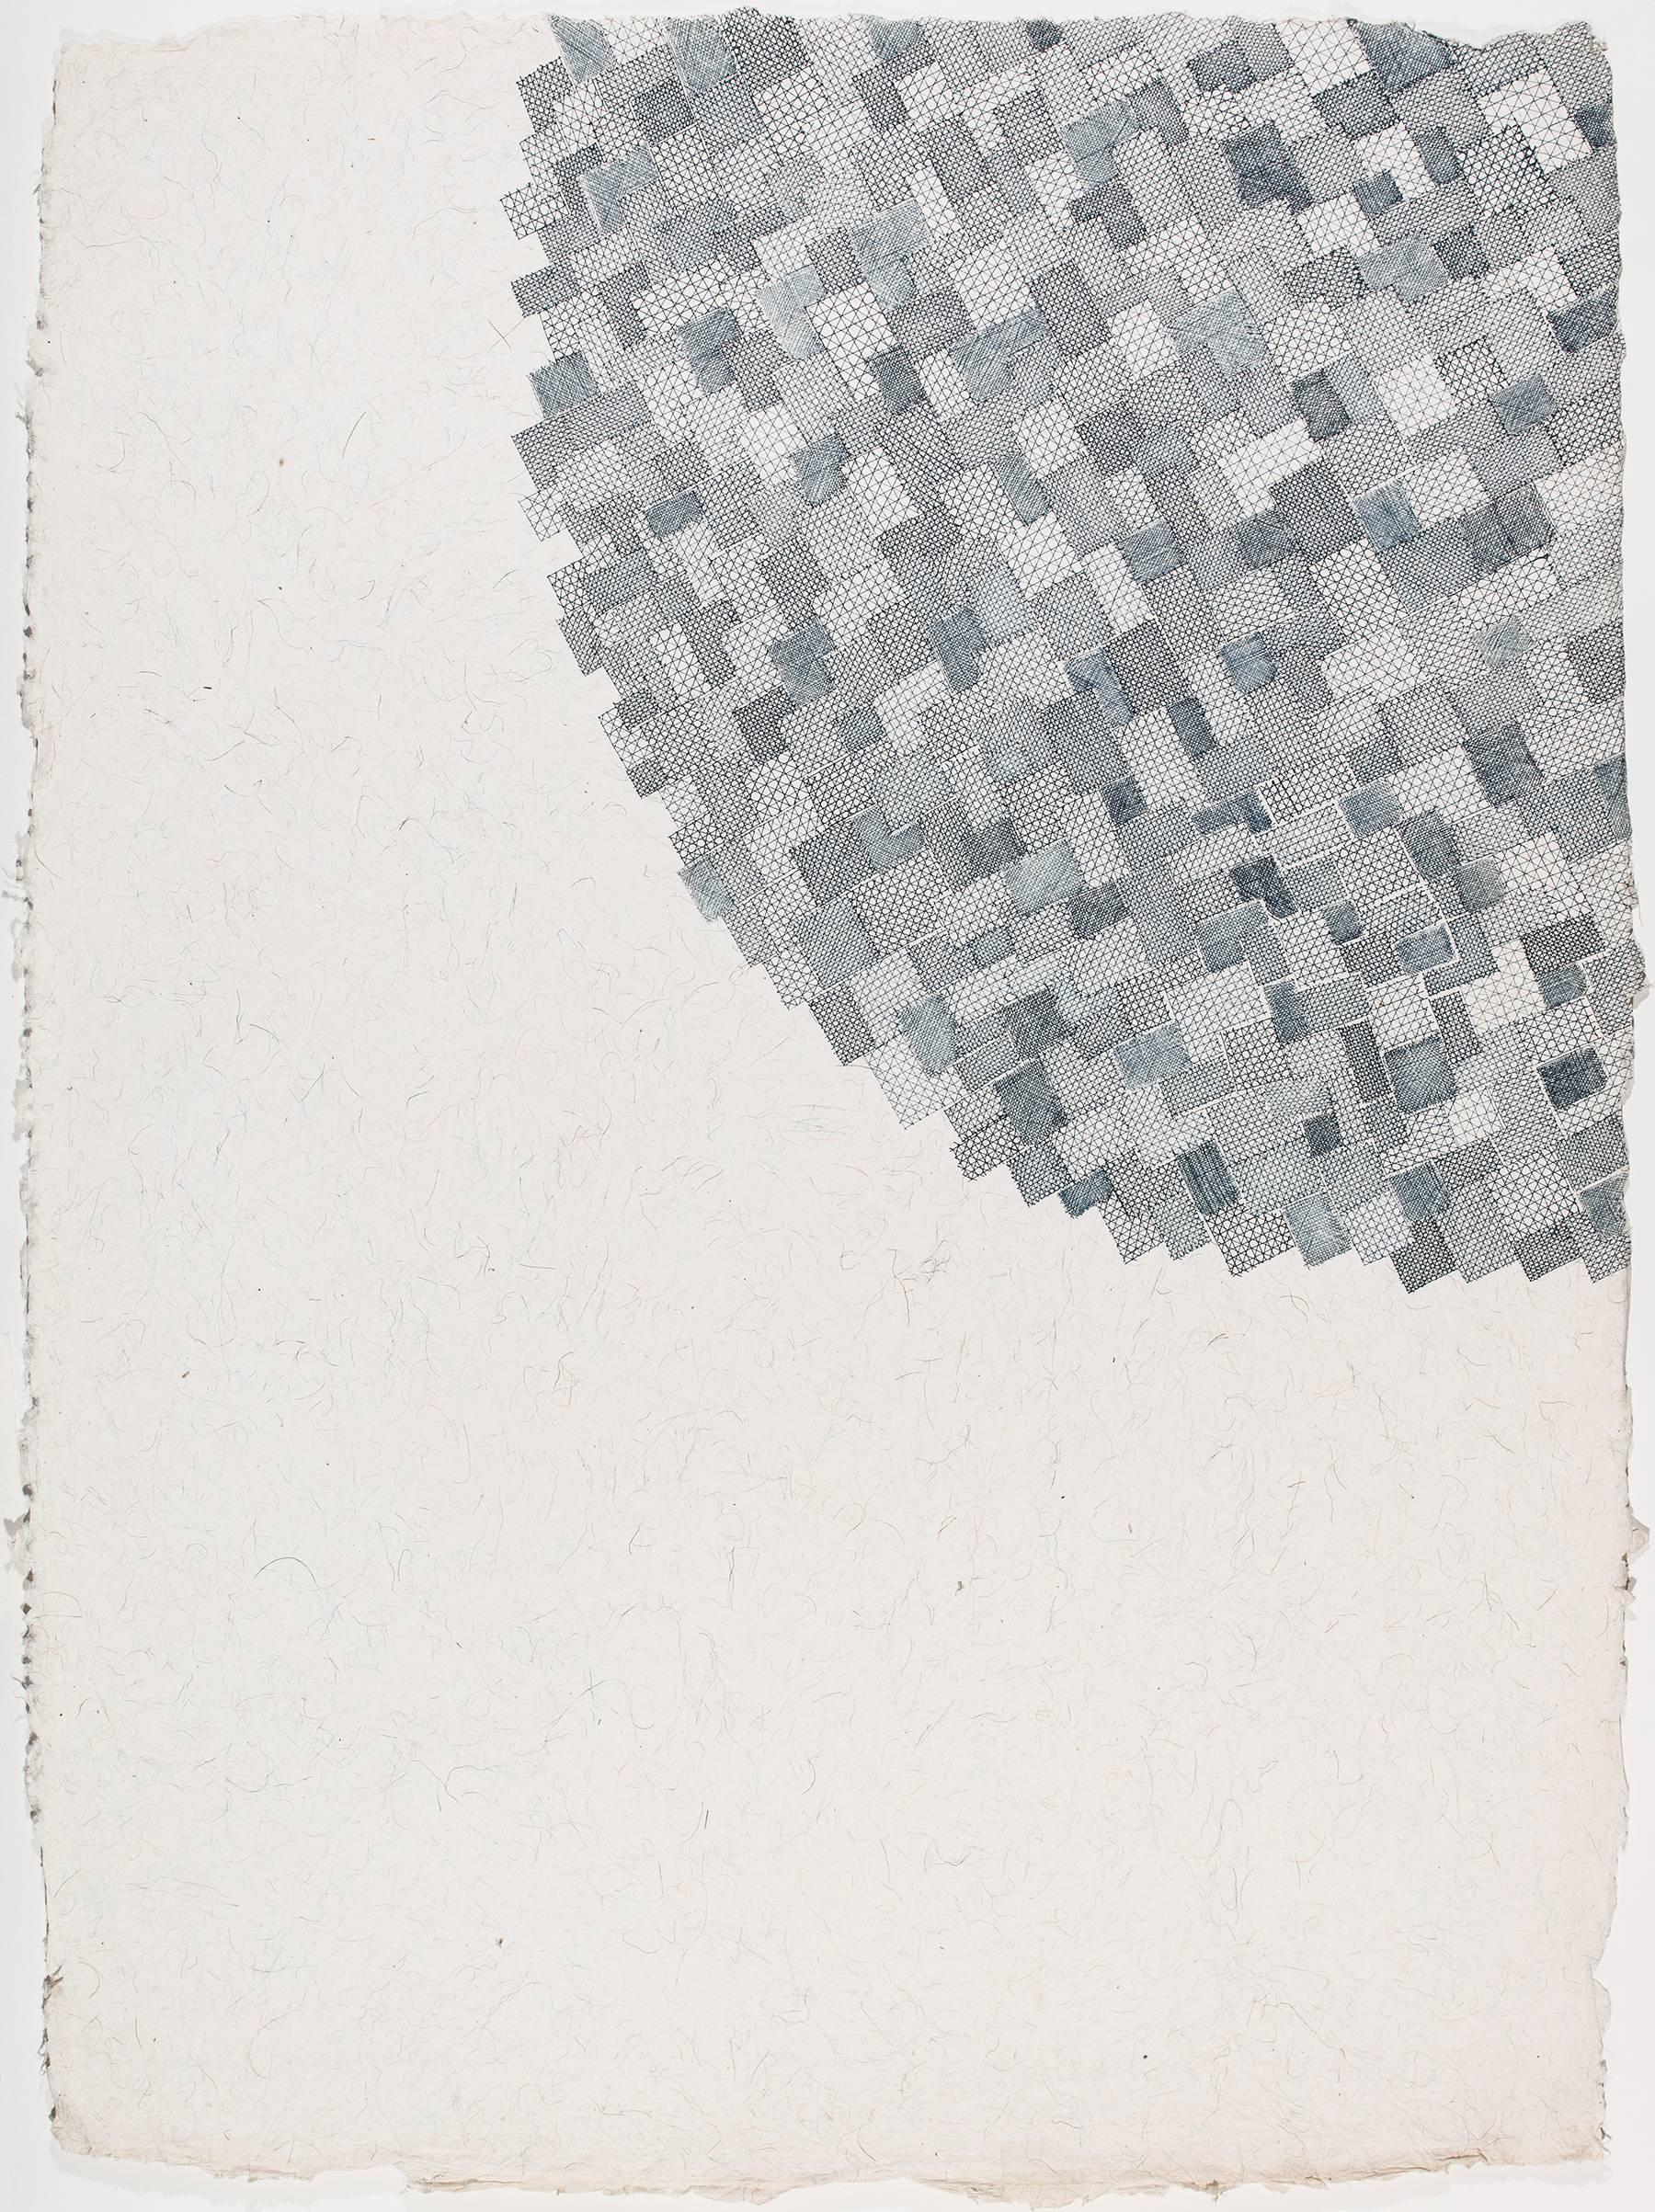 JEANNE HEIFETZ explores the Japanese principle of mottanai—the admonition against waste—in her ink drawings. Heifetz encapsulates the duality of mottanai by referencing both material waste with the patchwork patterning of her drawings, and the waste